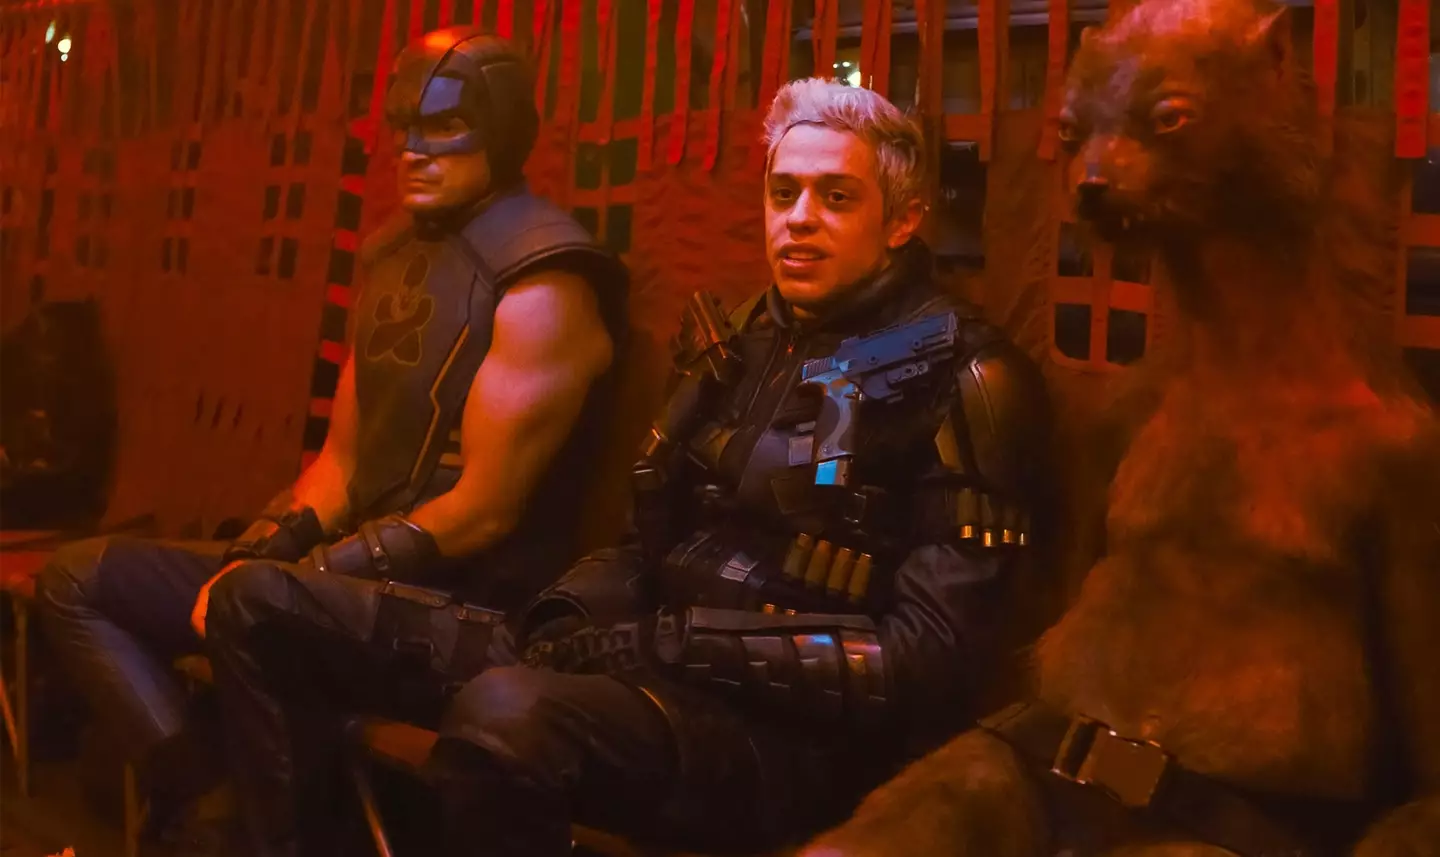 Nathan Fillion, Pete Davidson and Sean Gunn (as Weasel) all appeared in both The Suicide Squad and Guardians of the Galaxy Vol.3.